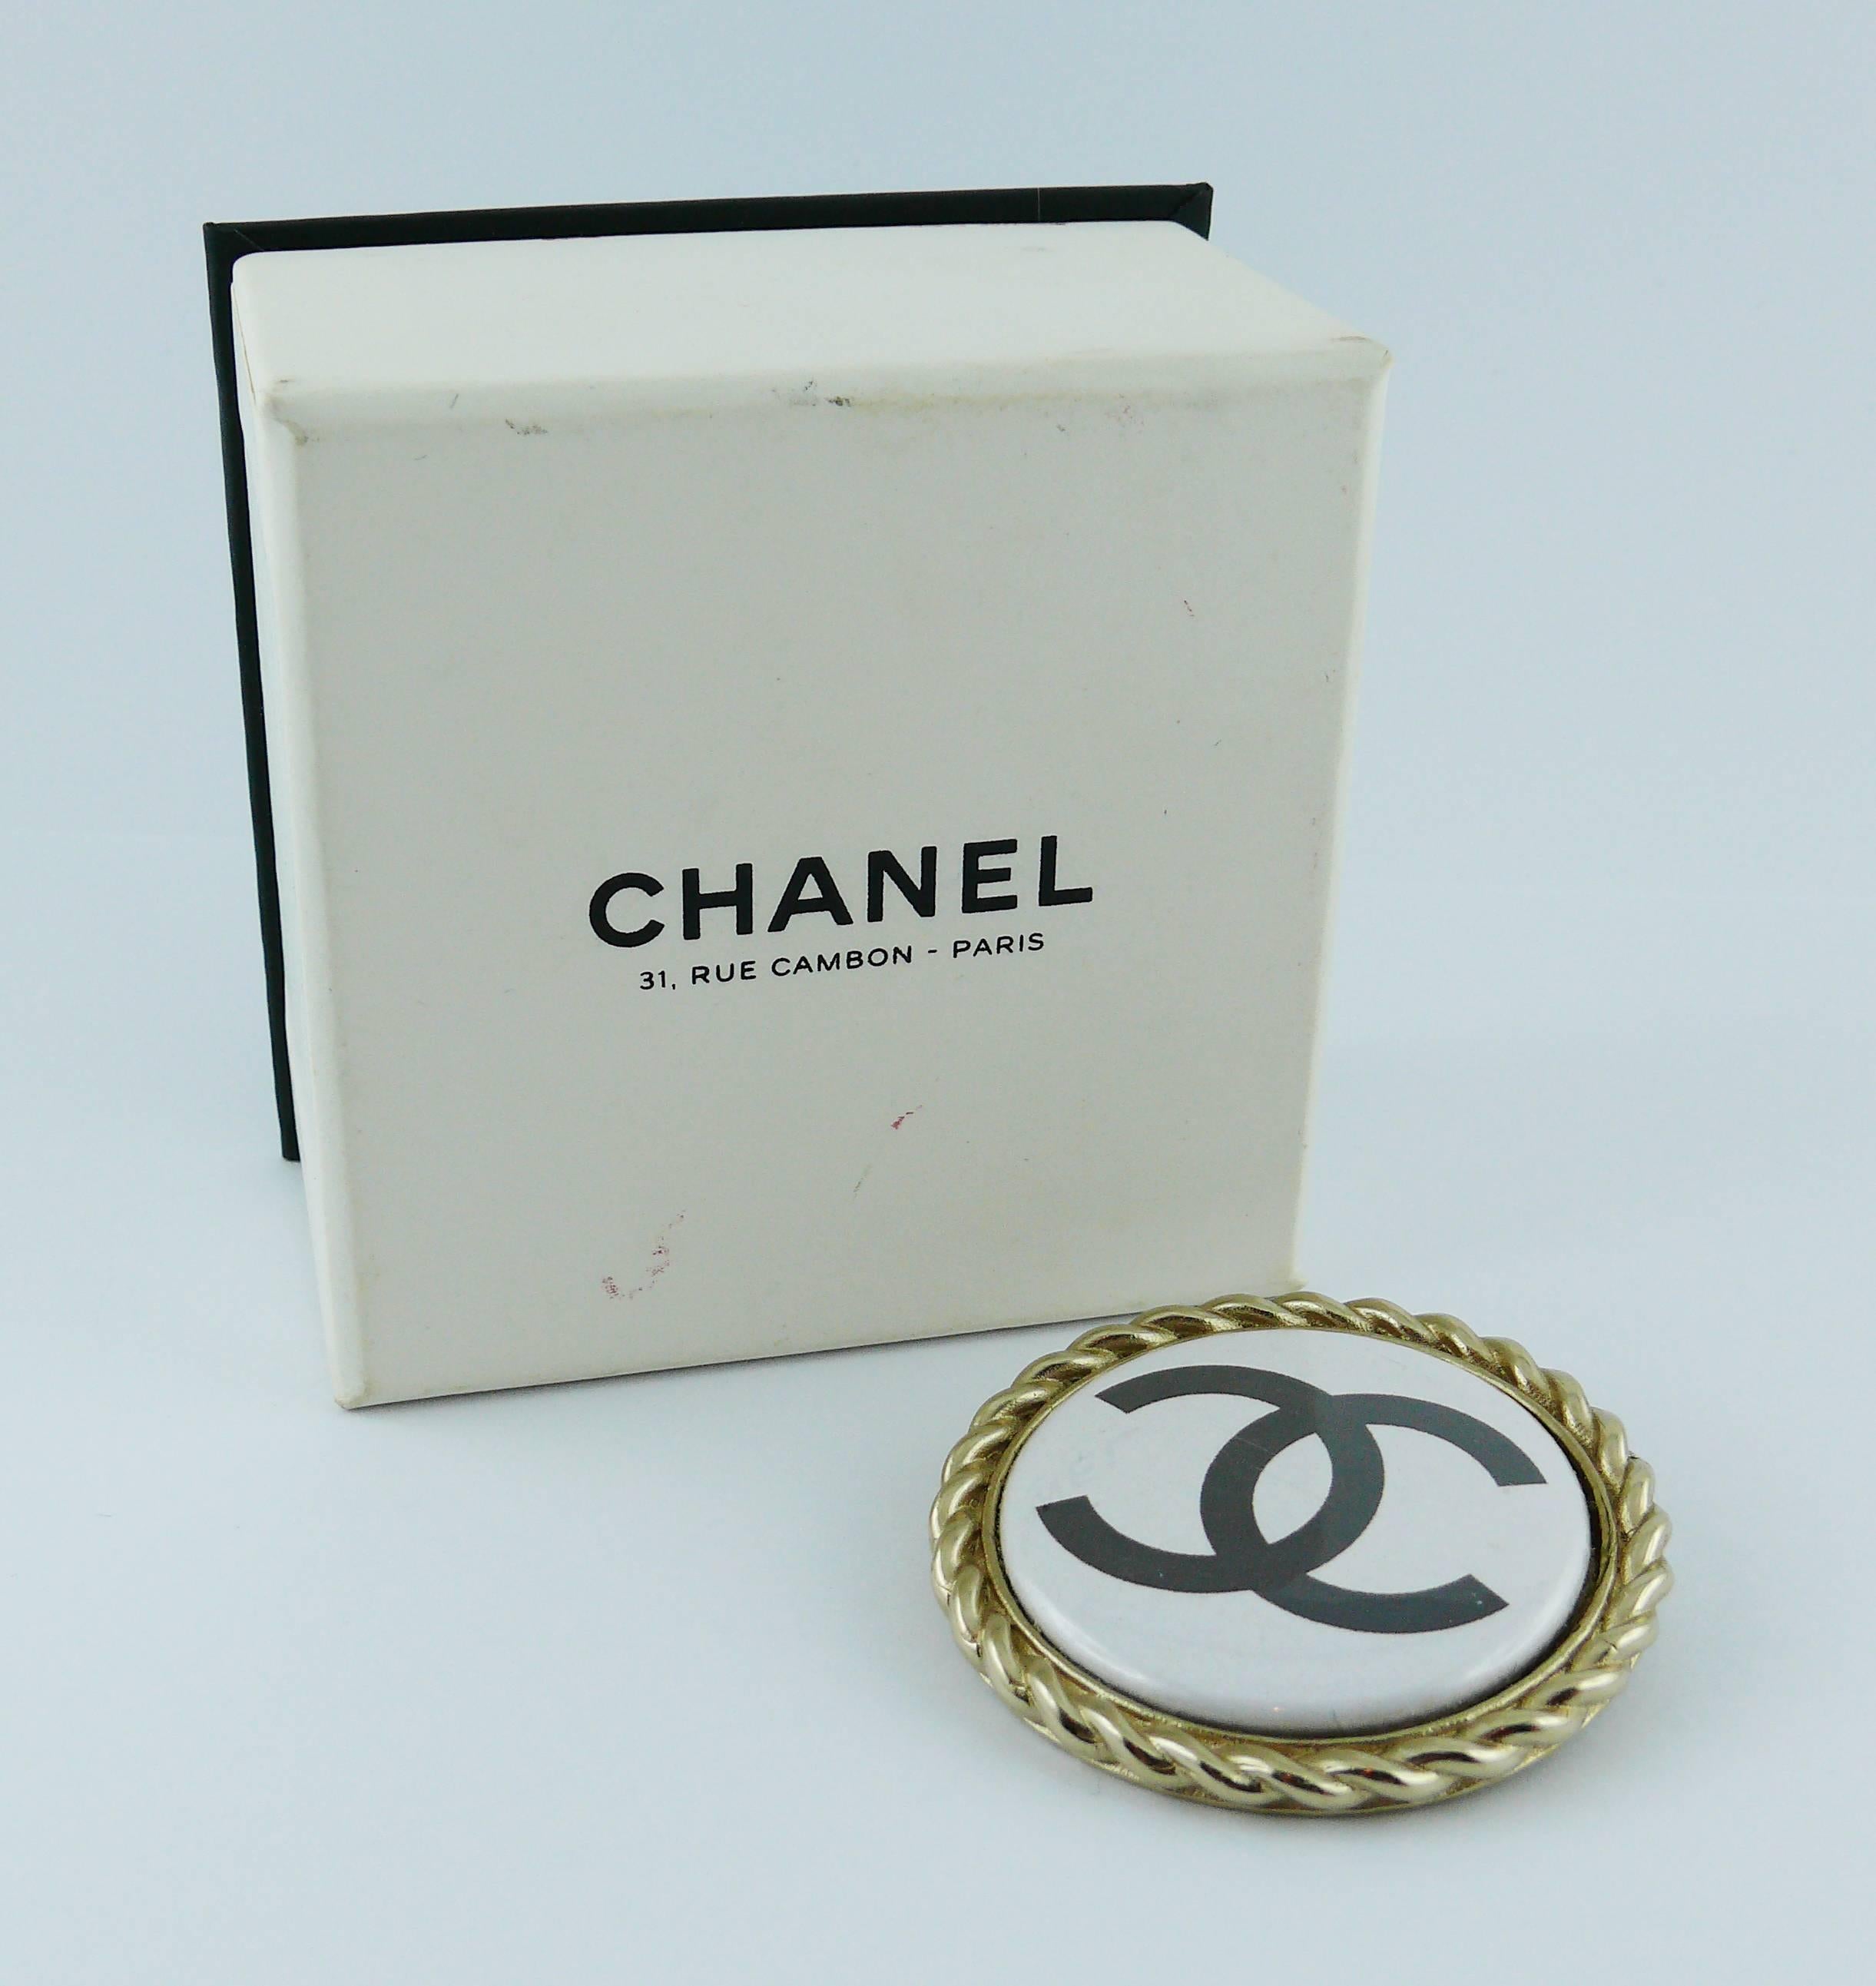 CHANEL brooch featuring a large printed black CC logo in a slightly gold toned setting.

Spring/Summer 2008 Collection.

Marked CHANEL 08 P Made in Italy.

Indicative measurements : diameter approx. 4.5 cm (1.77 inches).

Comes with CHANEL box